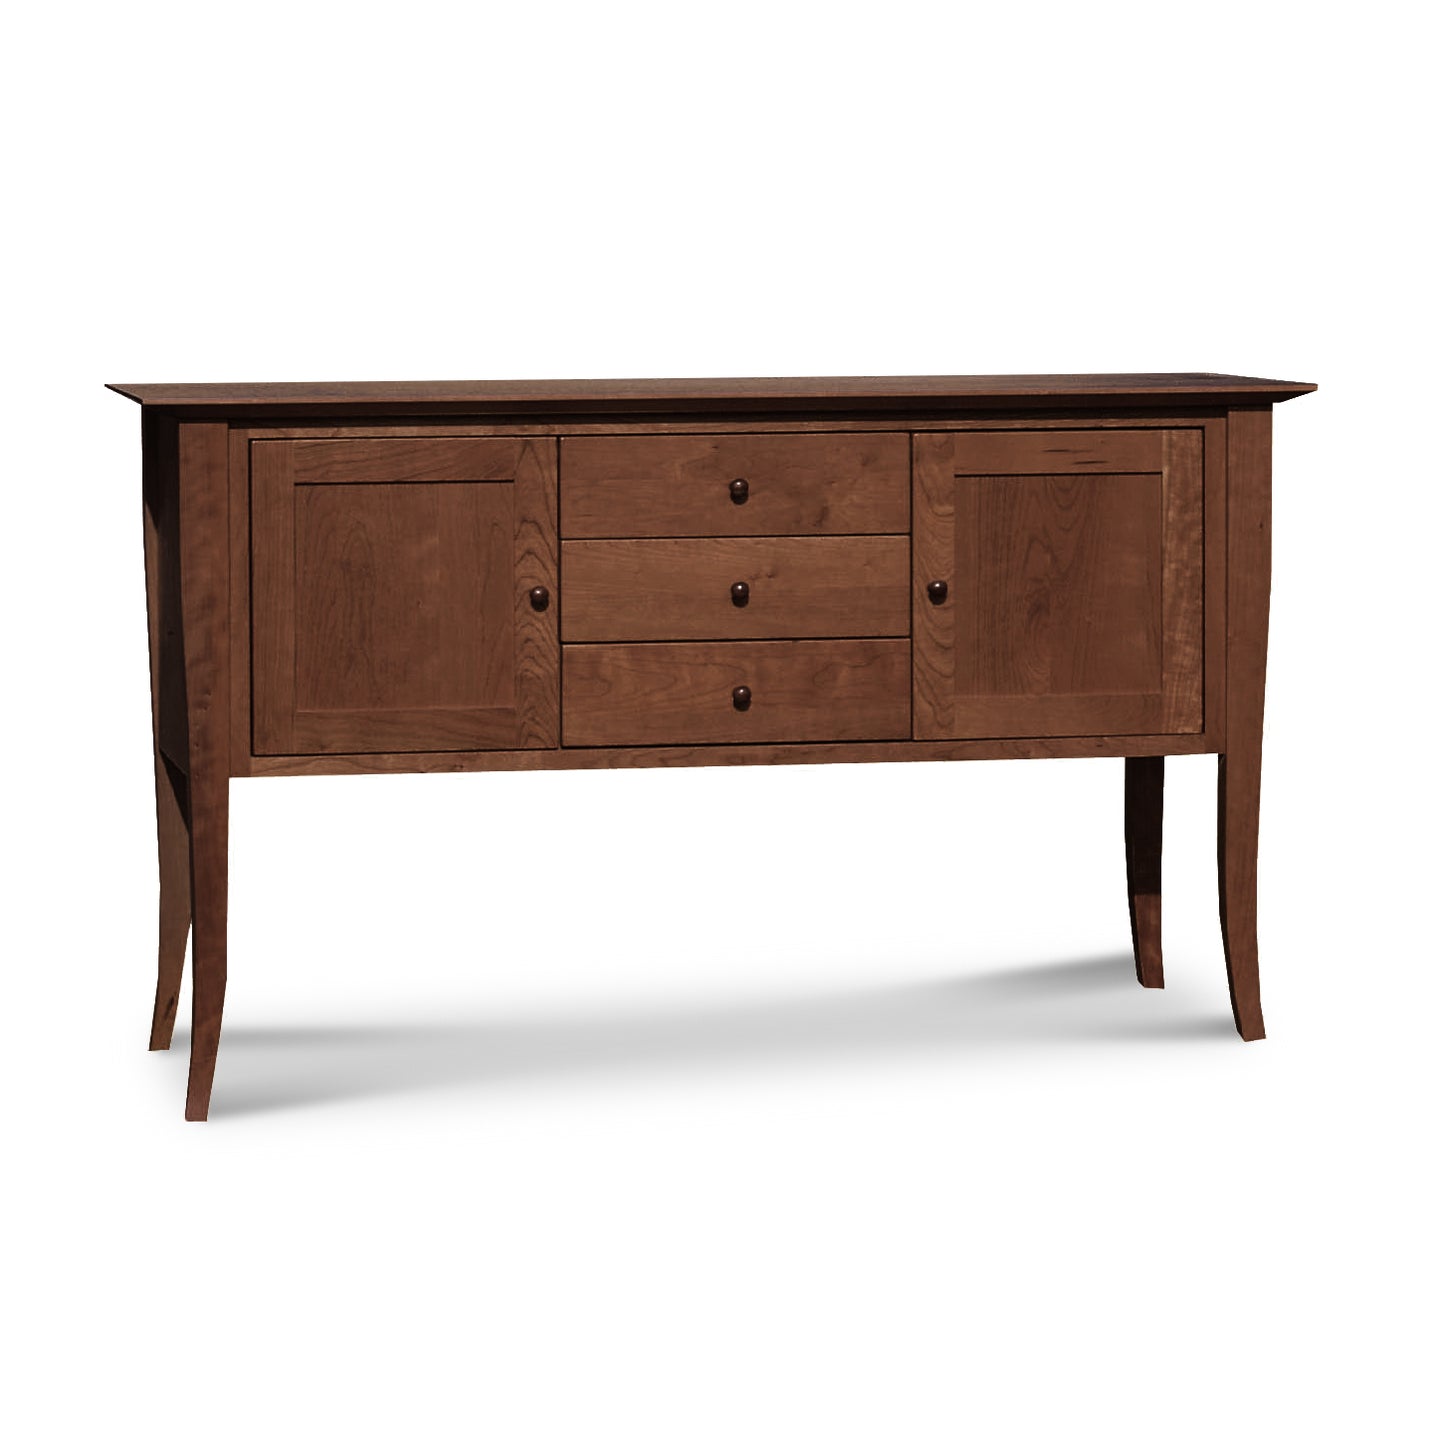 A Lyndon Furniture Classic Shaker Flare Leg Small Buffet with two drawers and two doors.